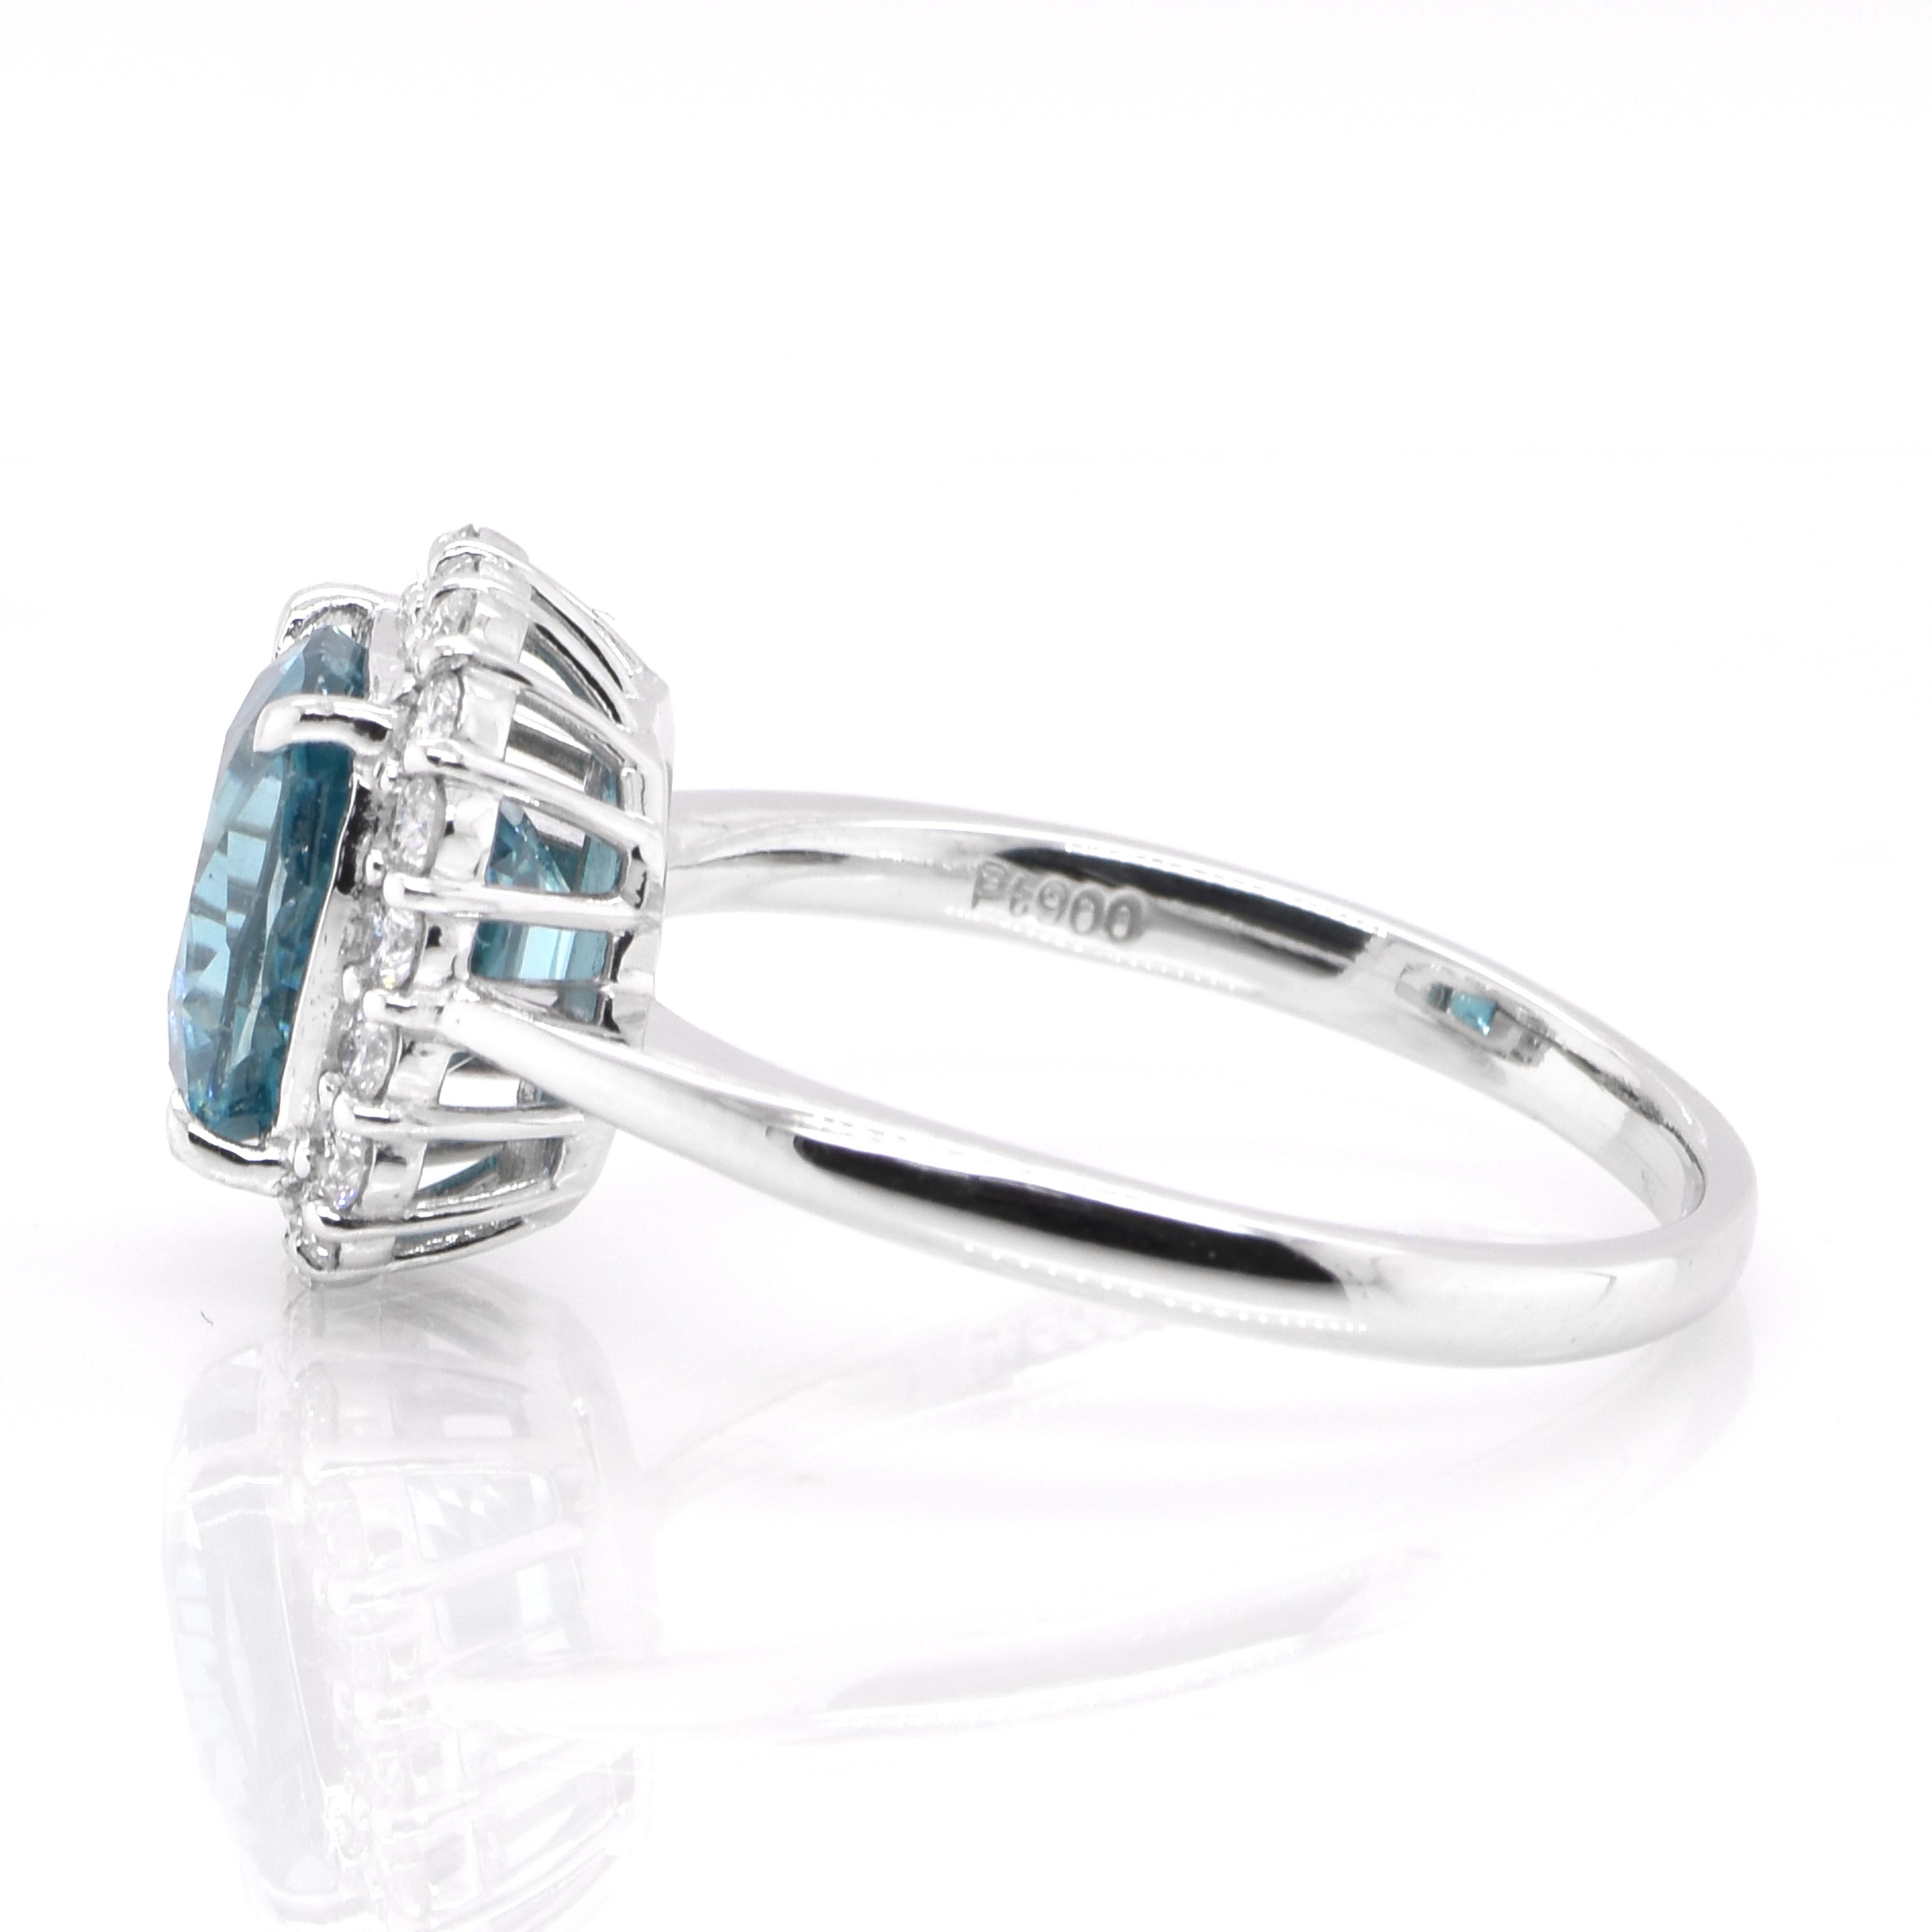 Cushion Cut 3.84 Carat Natural Cambodian Zircon and Diamond Halo Ring Set in Platinum For Sale